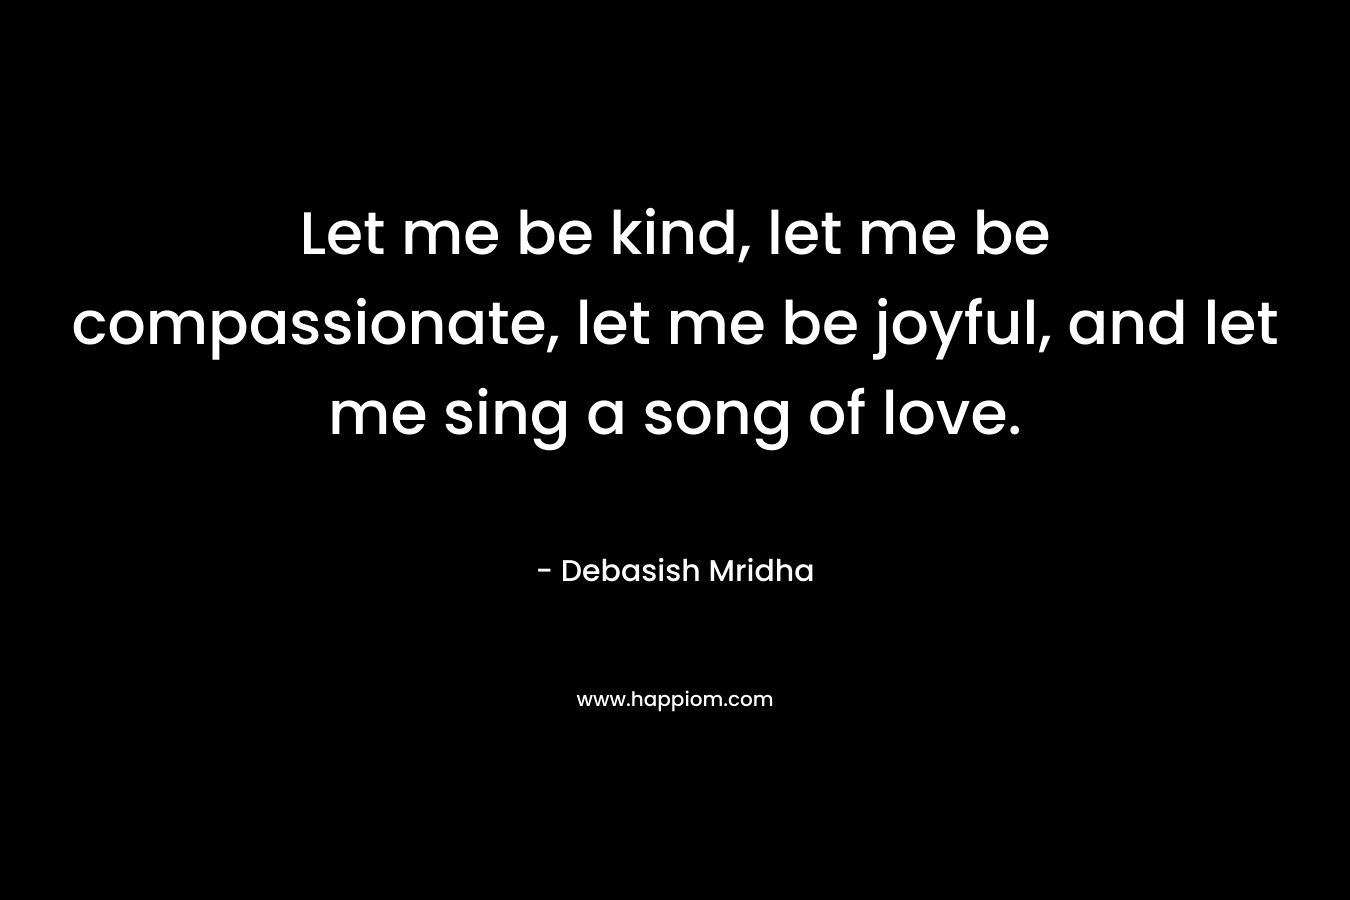 Let me be kind, let me be compassionate, let me be joyful, and let me sing a song of love.